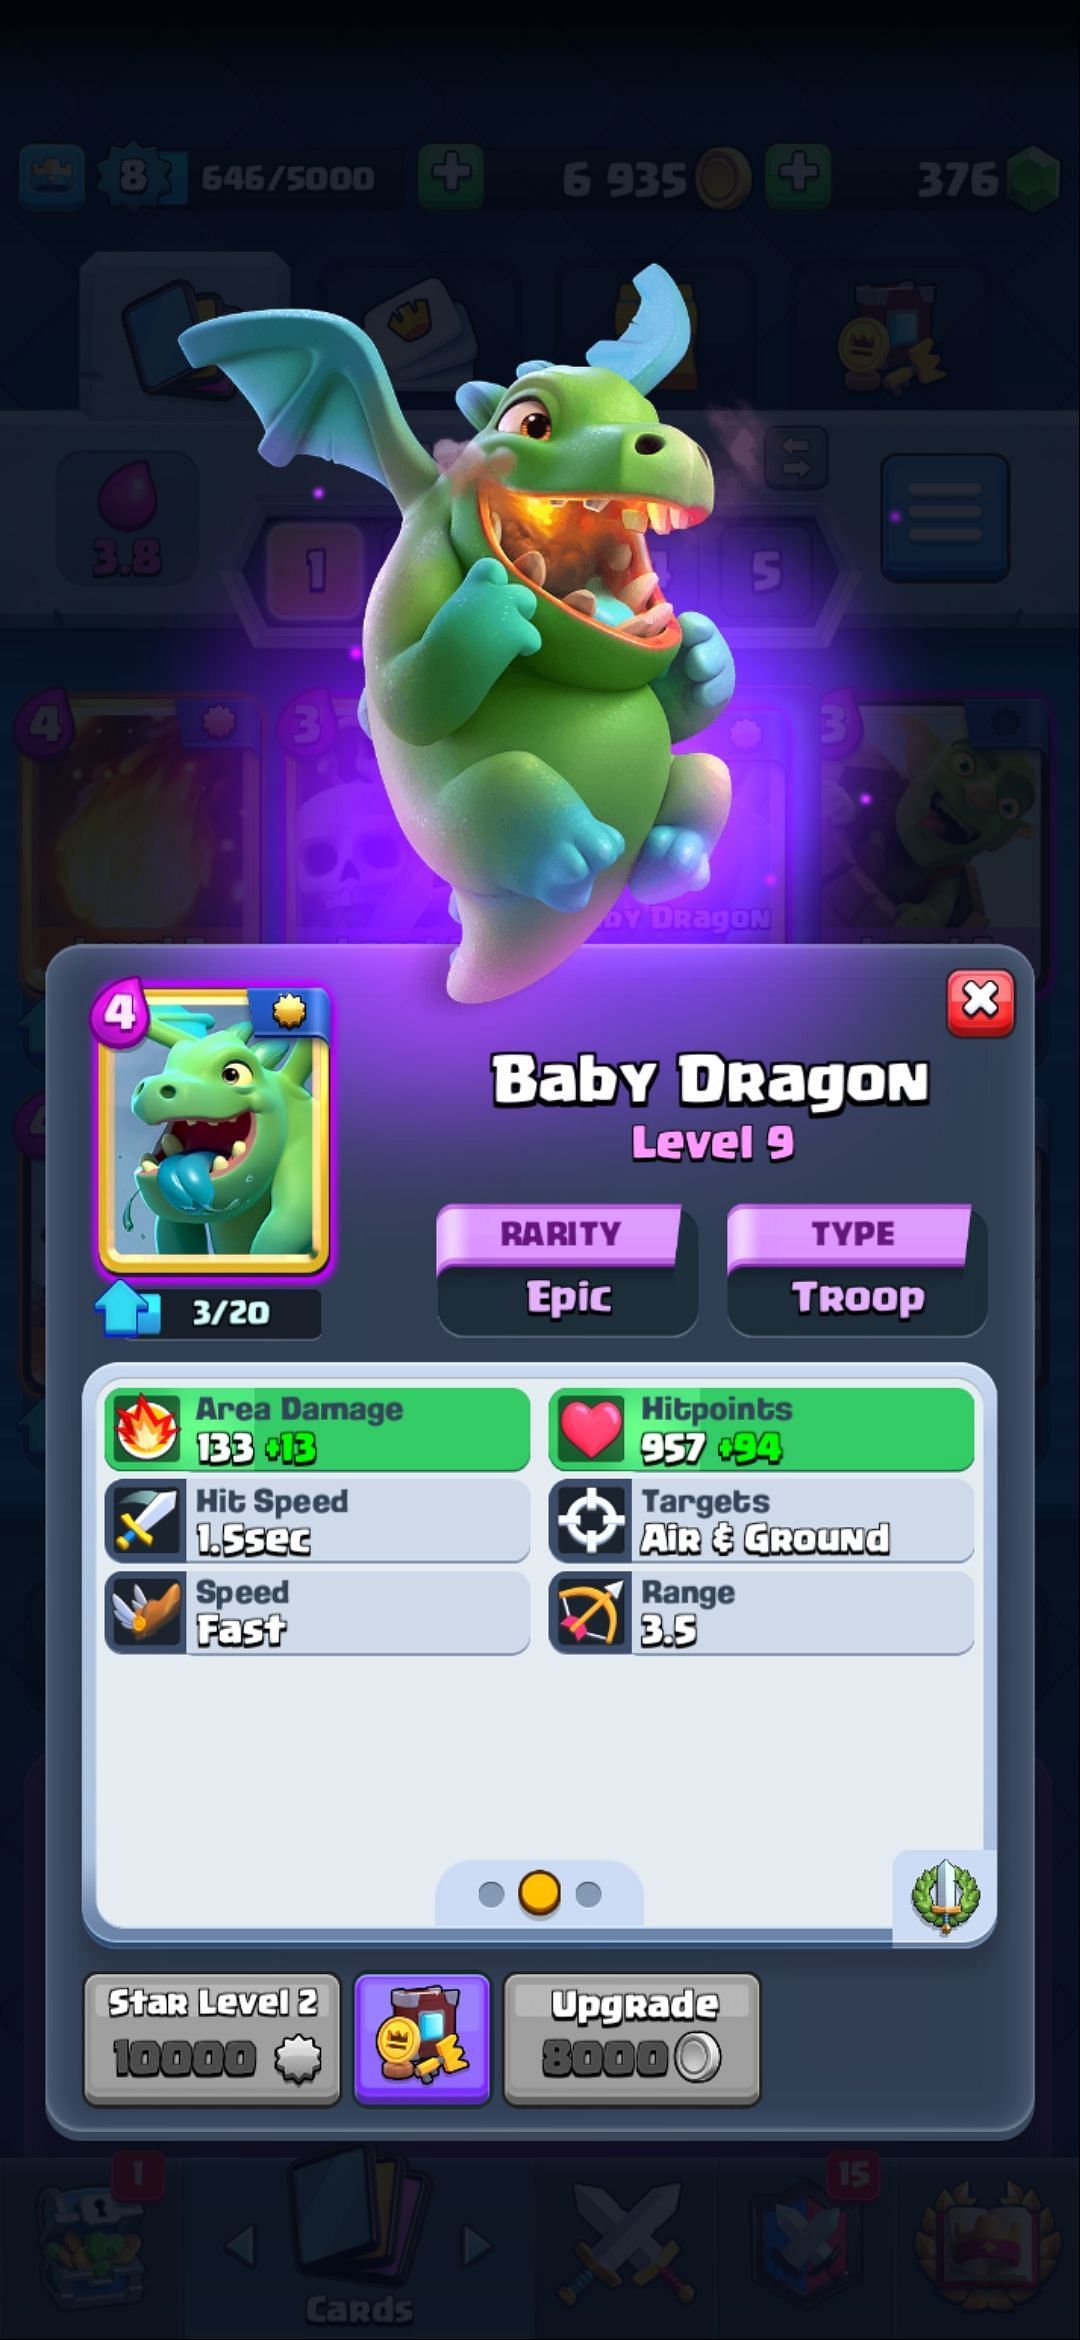 The Baby Dragon card (Image via Clash of Clans)